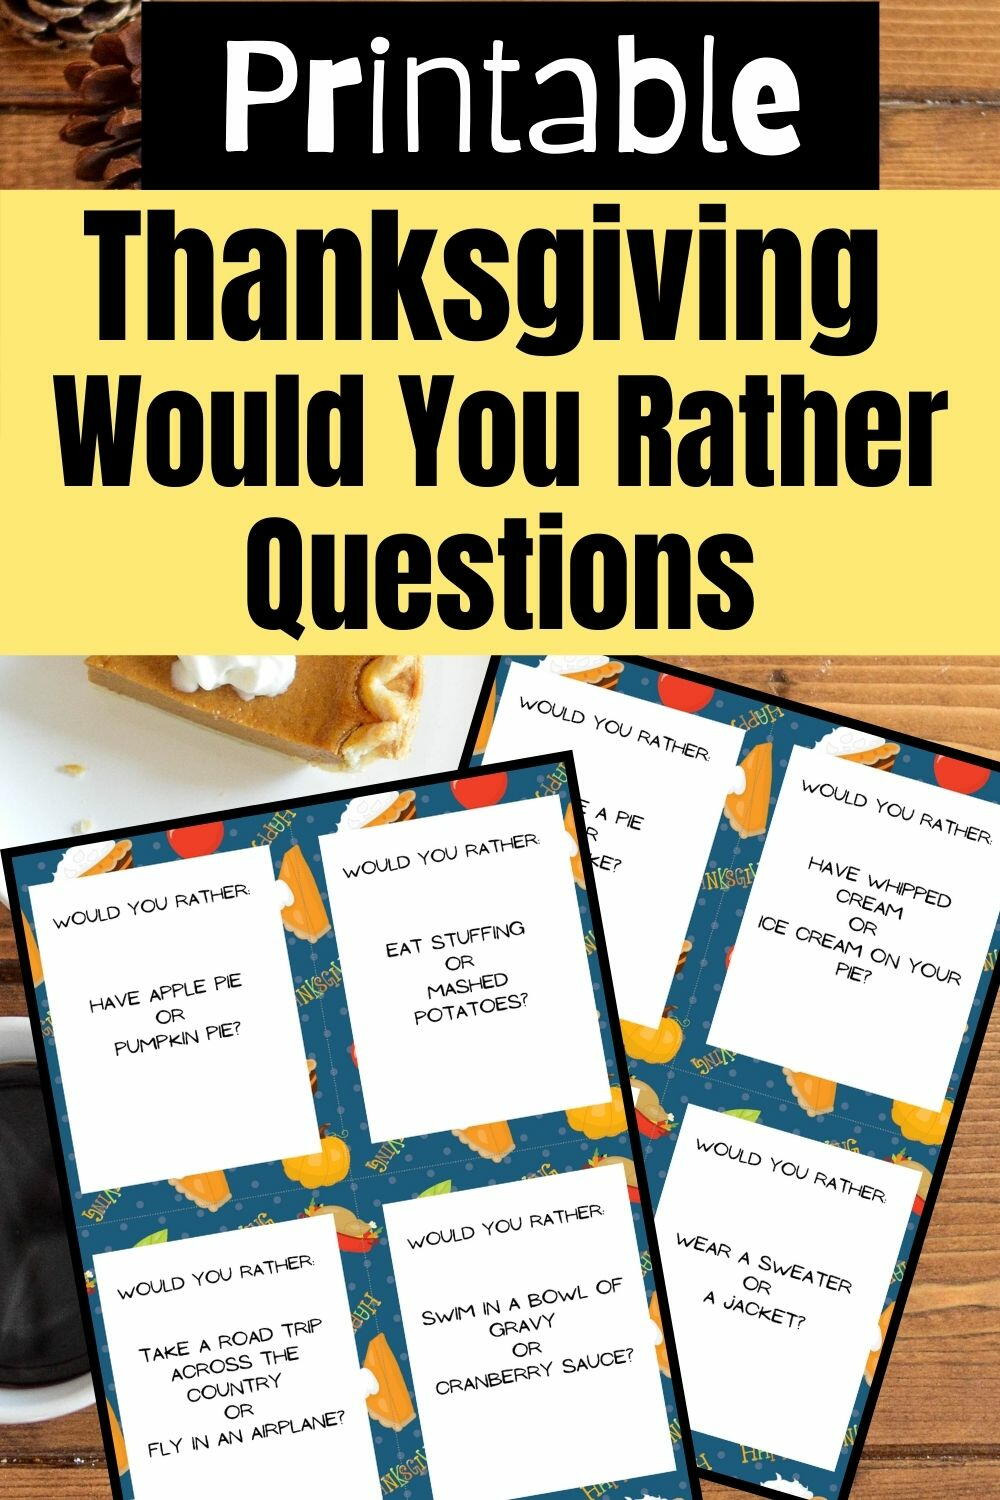 printable-thanksgiving-would-you-rather-questions-for-kids